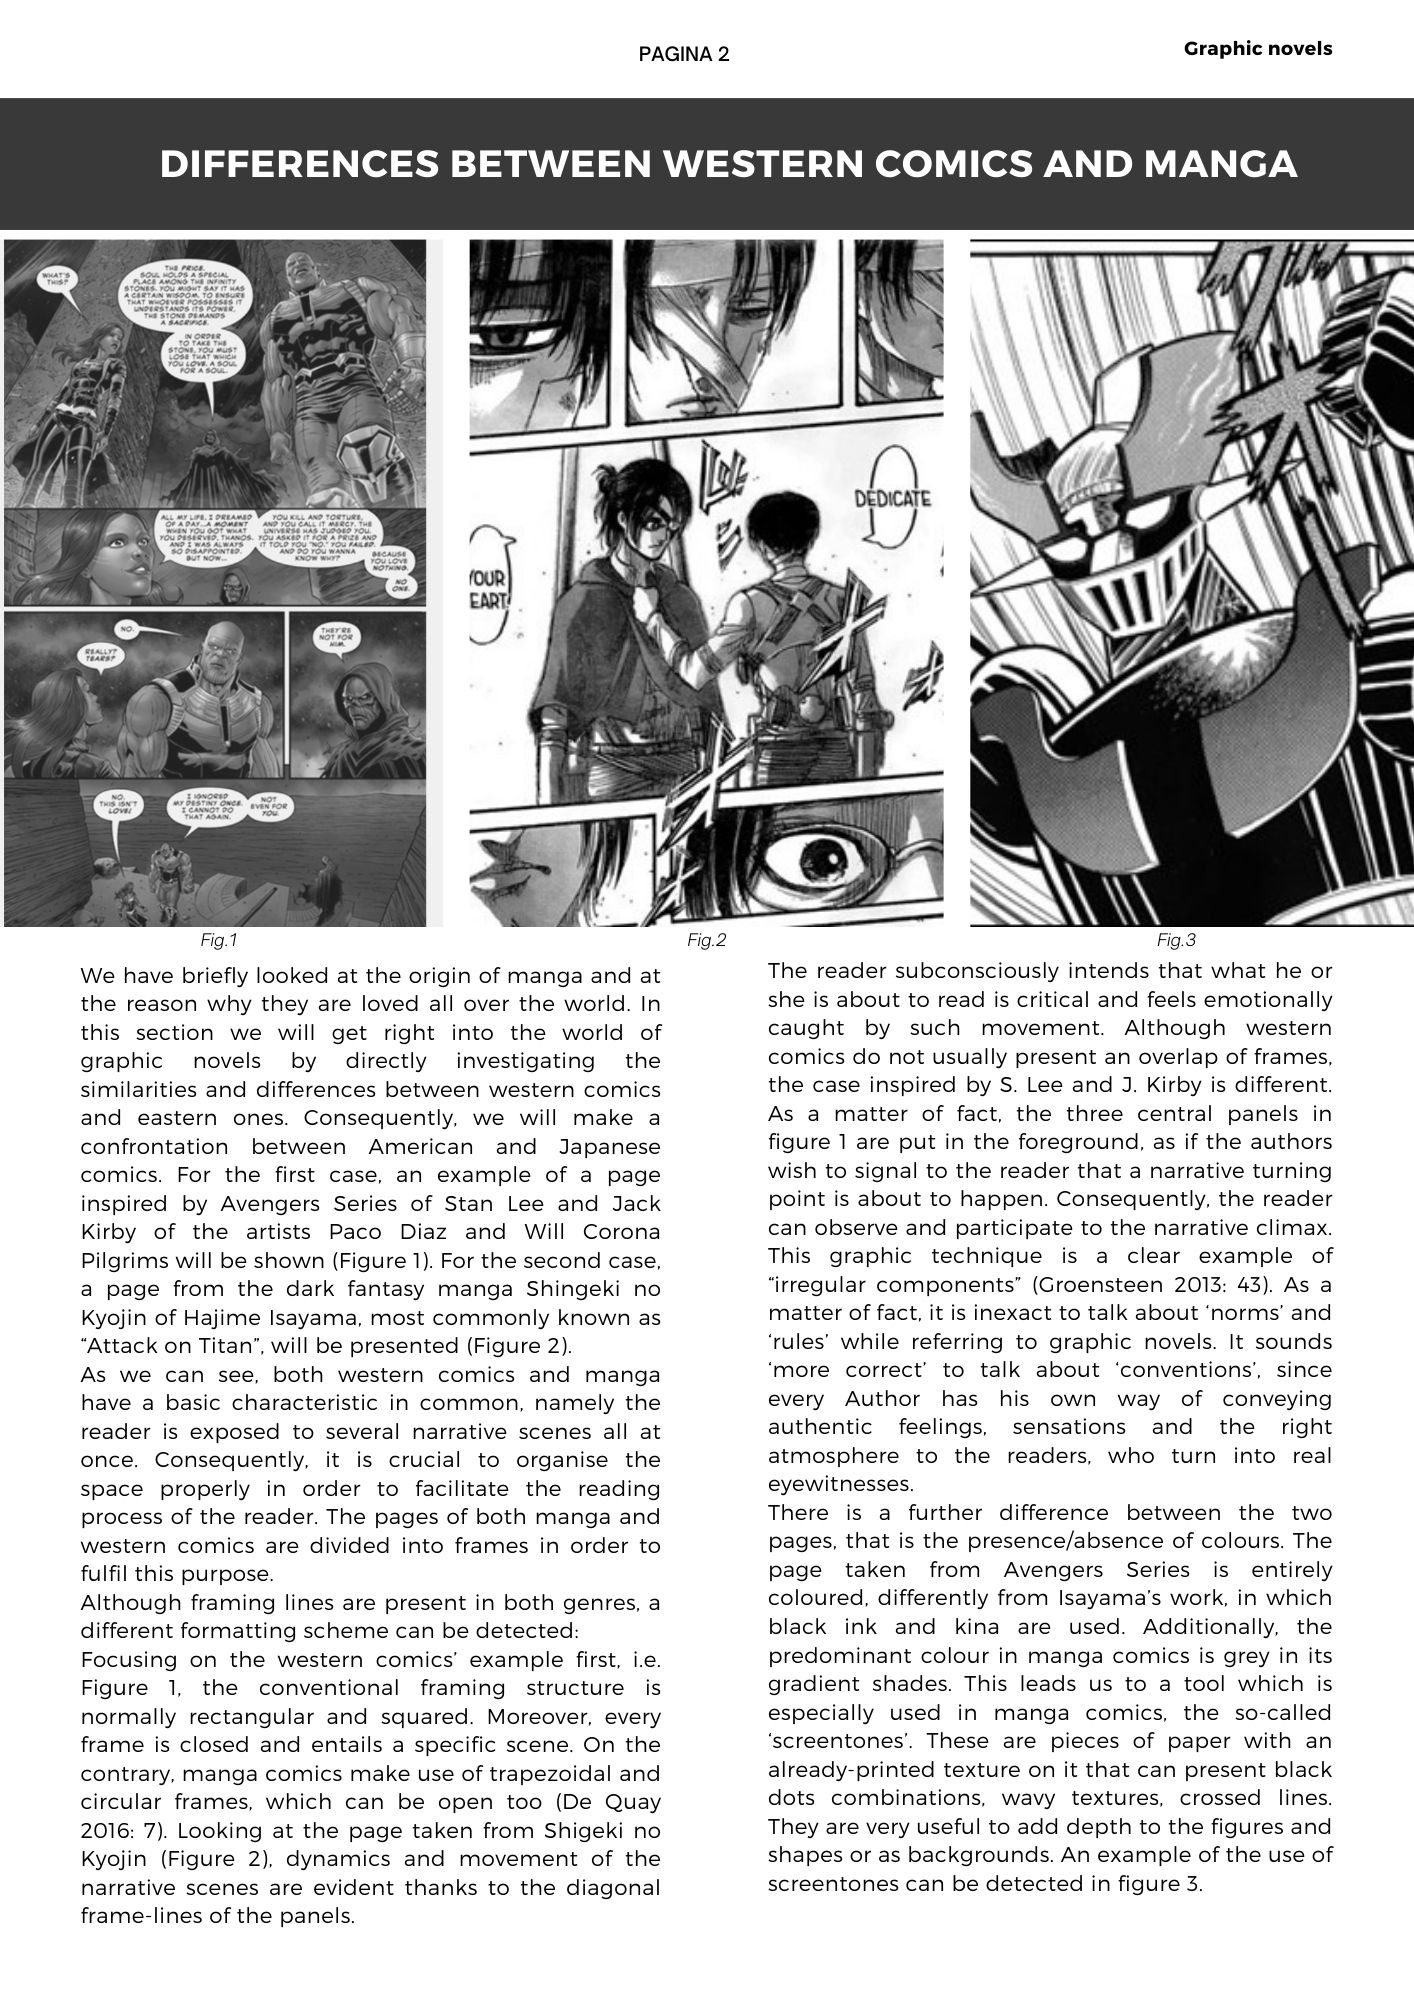 We have briefly looked at the origin of manga and at the reason why they are loved all over the world. In this section we will get right into the world of graphic novels by directly investigating the similarities and differences between western comics and eastern ones. Consequently, we will make a confrontation between American and Japanese comics. For the first case, an example of a page inspired by Avengers Series of Stan Lee and Jack Kirby of the artists Paco Diaz and Will Corona Pilgrims will be shown (Figure 1). For the second case, a page from the dark fantasy manga Shingeki no Kyojin of Hajime Isayama, most commonly known as Attack on Titan, will be presented (Figure 2). As we can see, both western comics and manga have a basic characteristic in common, namely the reader is exposed to several narrative scenes all at once. Consequently, it is crucial to organise the space properly in order to facilitate the reading process of the reader. The pages of both manga and western comics are divided into frames in order to fulfil this purpose.  Although framing lines are present in both genres, a different formatting scheme can be detected:  Focusing on the western comics’ example first, i.e. Figure 1, the conventional framing structure is normally rectangular and squared. Moreover, every frame is closed and entails a specific scene. On the contrary, manga comics make use of trapezoidal and circular frames, which can be open too (De Quay 2016: 7). Looking at the page taken from Shigeki no Kyojin (Figure 2), dynamics and movement of the narrative scenes are evident thanks to the diagonal frame-lines of the panels.  The reader subconsciously intends that what he or she is about to read is critical and feels emotionally caught by such movement. Although western comics do not usually present an overlap of frames, the case inspired by S. Lee and J. Kirby is different. As a matter of fact, the three central panels in figure 1 are put in the foreground, as if the authors wish to signal to the reader that a narrative turning point is about to happen. Consequently, the reader can observe and participate to the narrative climax. This graphic technique is a clear example of “irregular components” (Groensteen 2013: 43). As a matter of fact, it is inexact to talk about ‘norms’ and ‘rules’ while referring to graphic novels. It sounds ‘more correct’ to talk about ‘conventions’, since every Author has his own way of conveying authentic feelings, sensations and the right atmosphere to the readers, who turn into real eyewitnesses.  There is a further difference between the two pages, that is the presence/absence of colours. The page taken from Avengers Series is entirely coloured, differently from Isayama’s work, in which black ink and kina are used. Additionally, the predominant colour in manga comics is grey in its gradient shades. This leads us to a tool which is especially used in manga comics, the so-called ‘screentones’. These are pieces of paper with an already-printed texture on it that can present black dots combinations, wavy textures, crossed lines. They are very useful to add depth to the figures and shapes or as backgrounds. An example of the use of screentones can be detected in figure 3. 